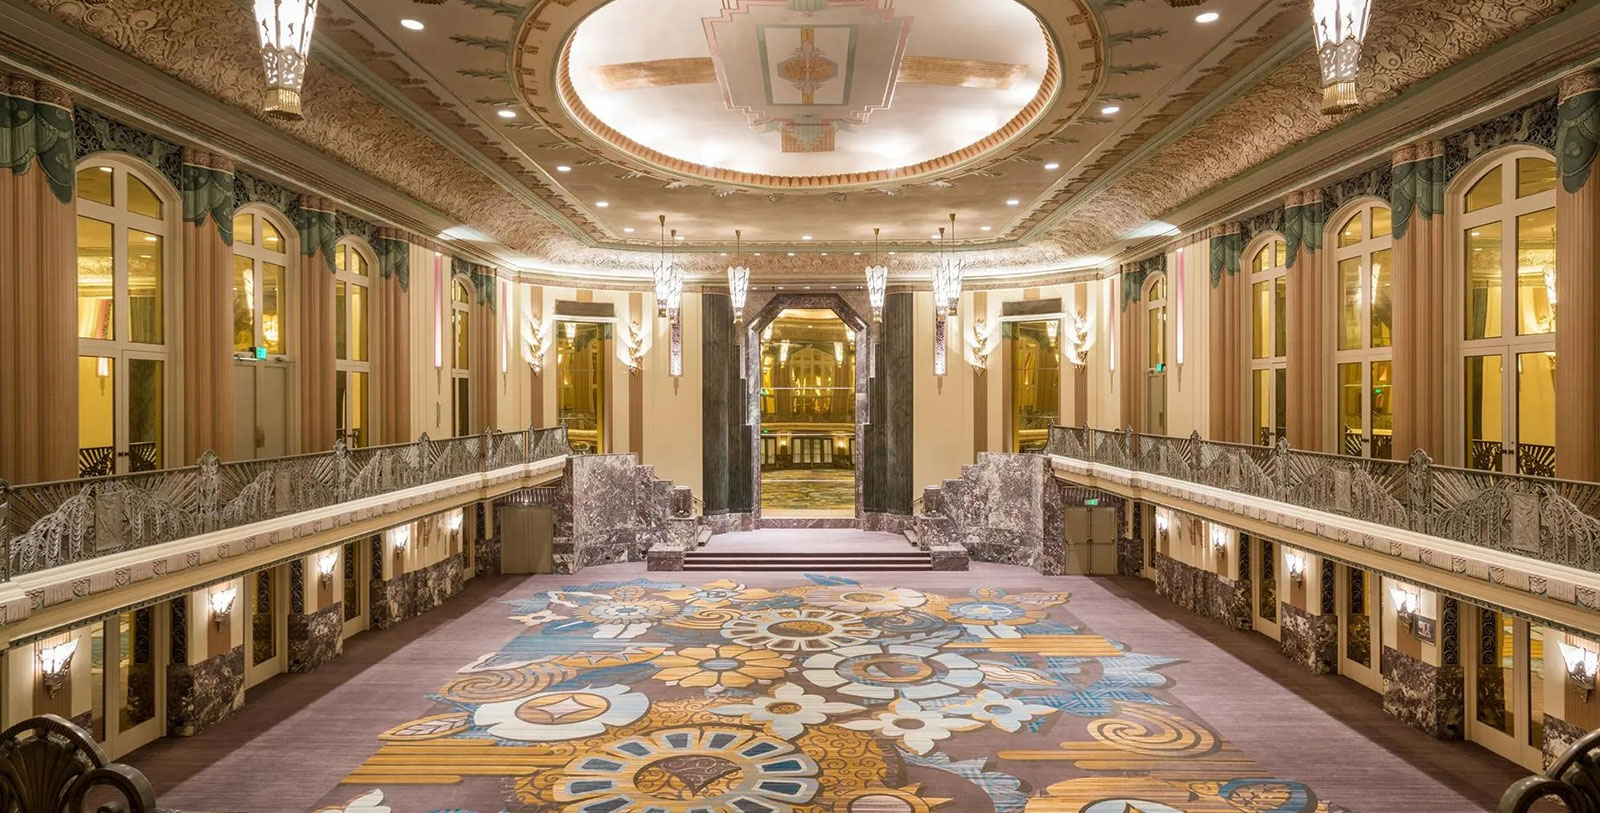 Image of the Hall of Mirrors in the Hilton Cincinnati Netherland Plaza, 1931, Member of Historic Hotels of America, in Cincinnati, Ohio, Venues and Services